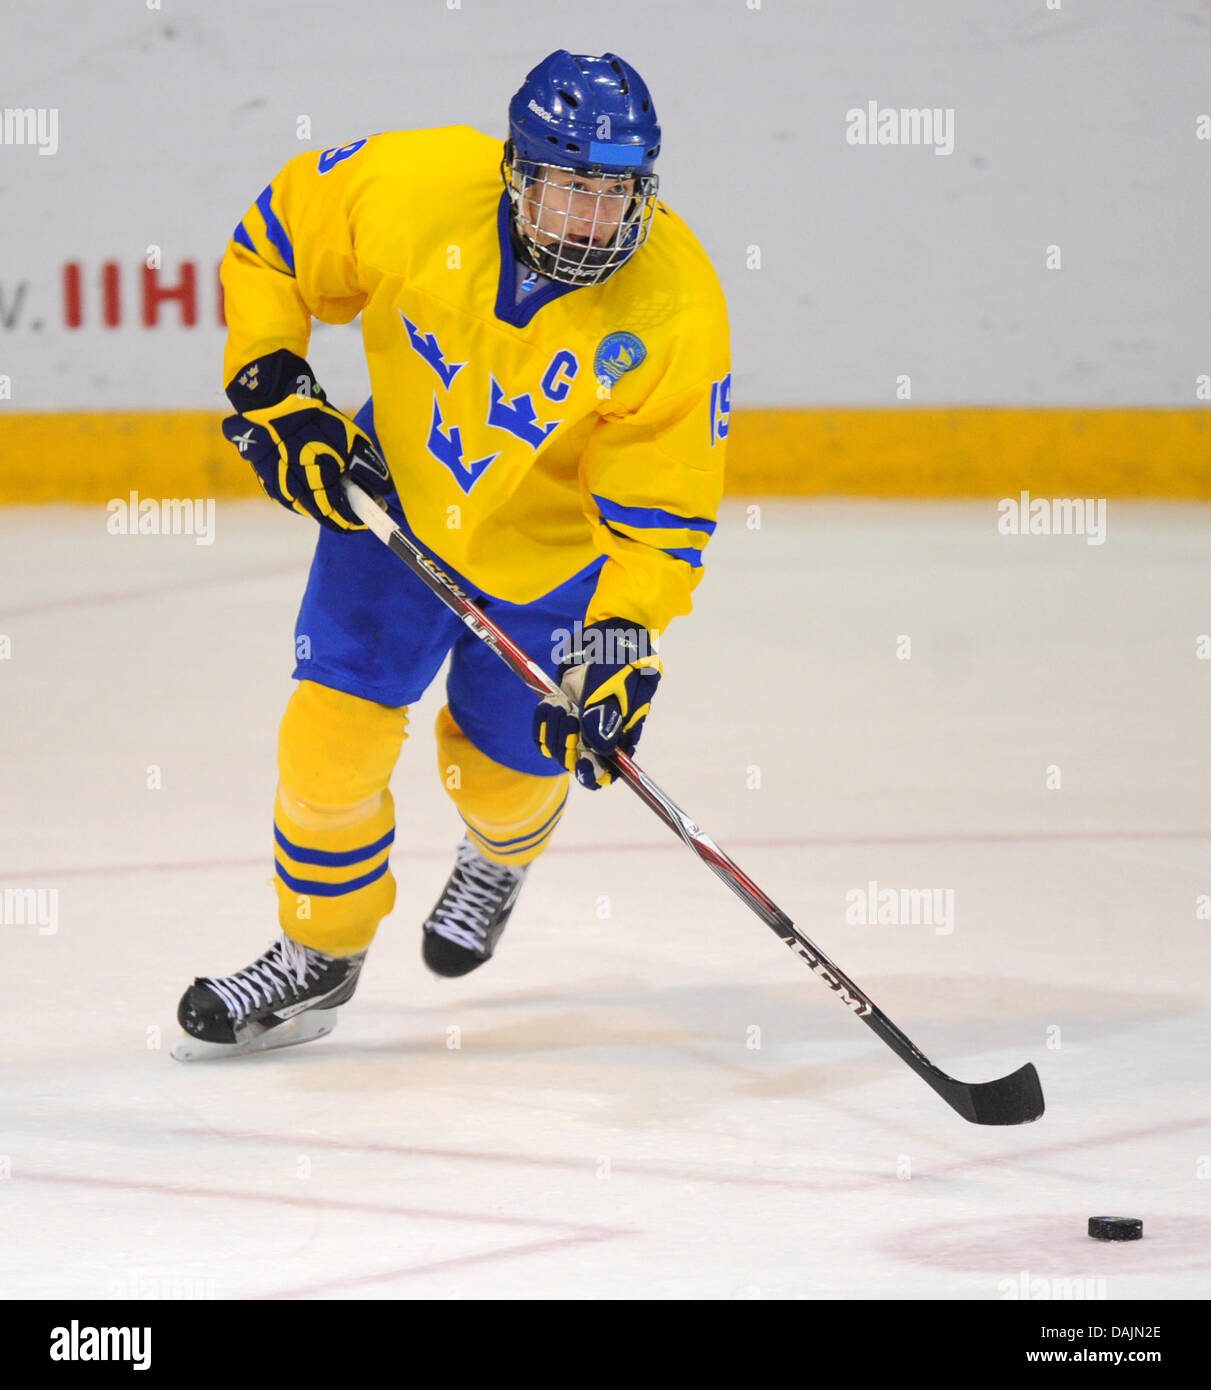 Sweden's Oscar Klefbom is pictured during the IIHF U18 World Ice Hockey Championships in Dresden, Germany, 19 April 2011. Photo: Thomas Eisenhuth Stock Photo